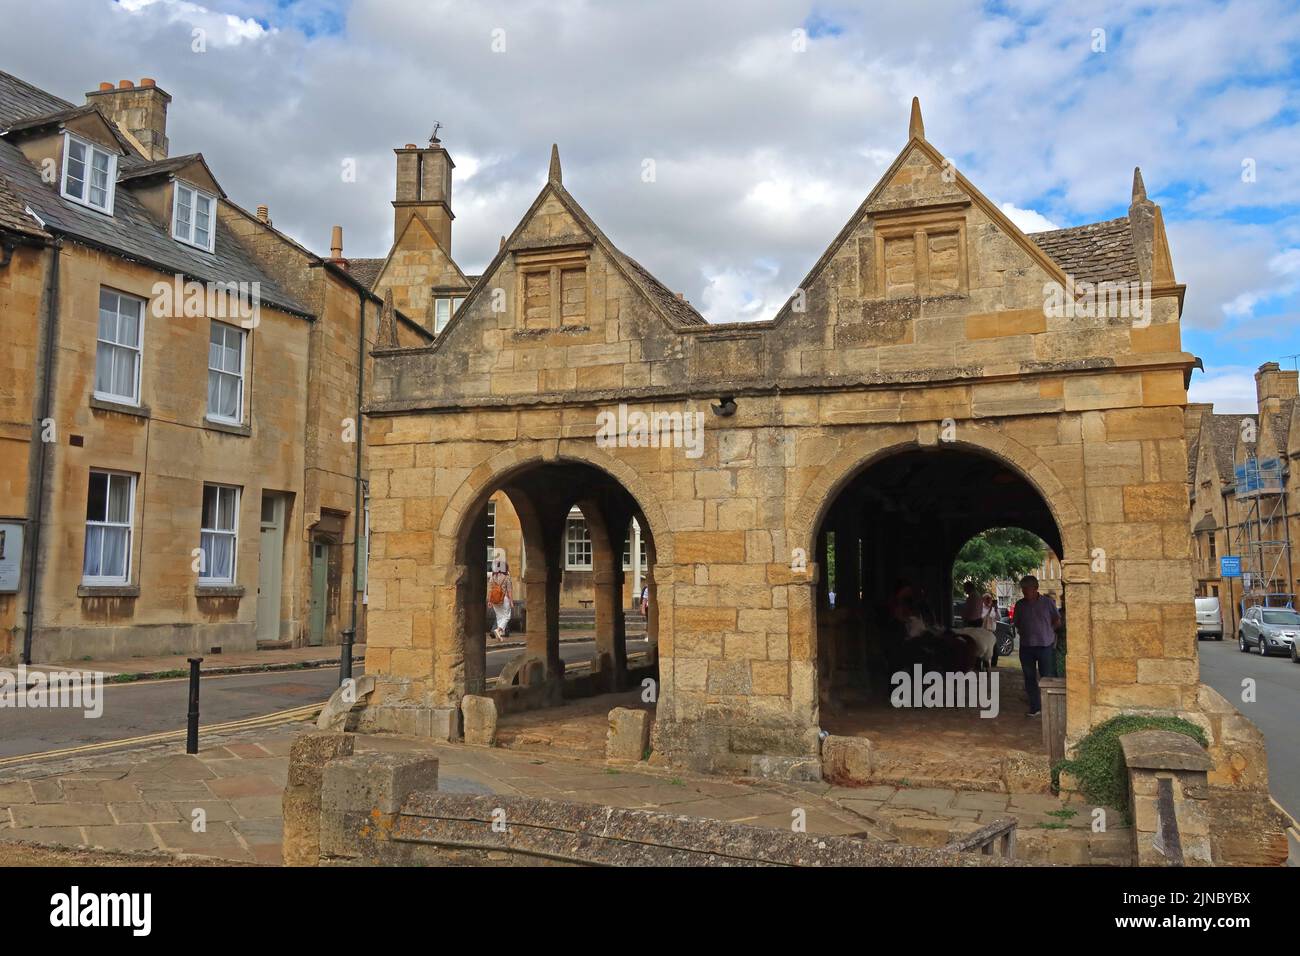 1627 Market Hall , High Street, Chipping Camden, Cotswolds Market Town, Cotswold, Oxfordshire, England, Großbritannien, GL55 6AA Stockfoto